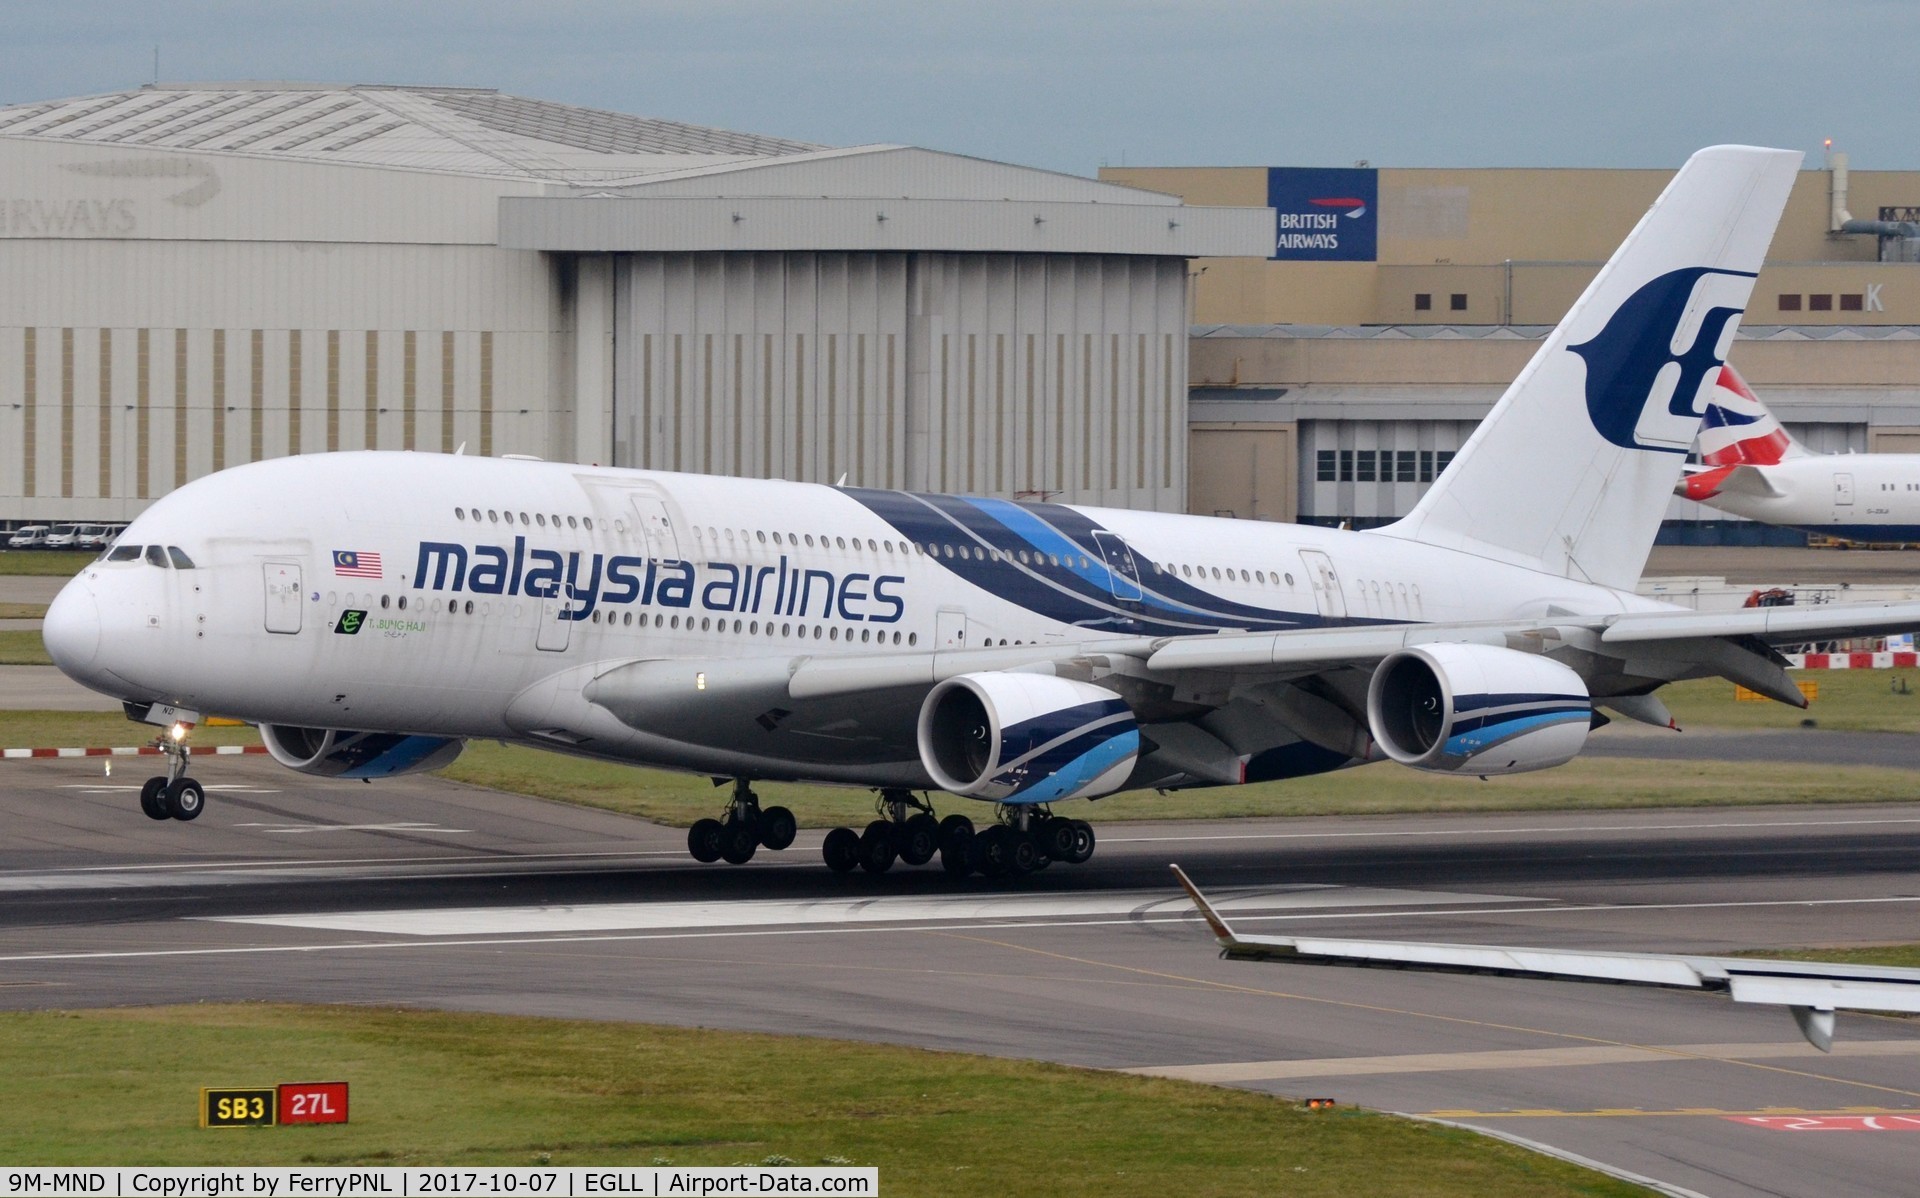 9M-MND, 2012 Airbus A380-841 C/N 089, Malaysian A388 just moments before touch down.